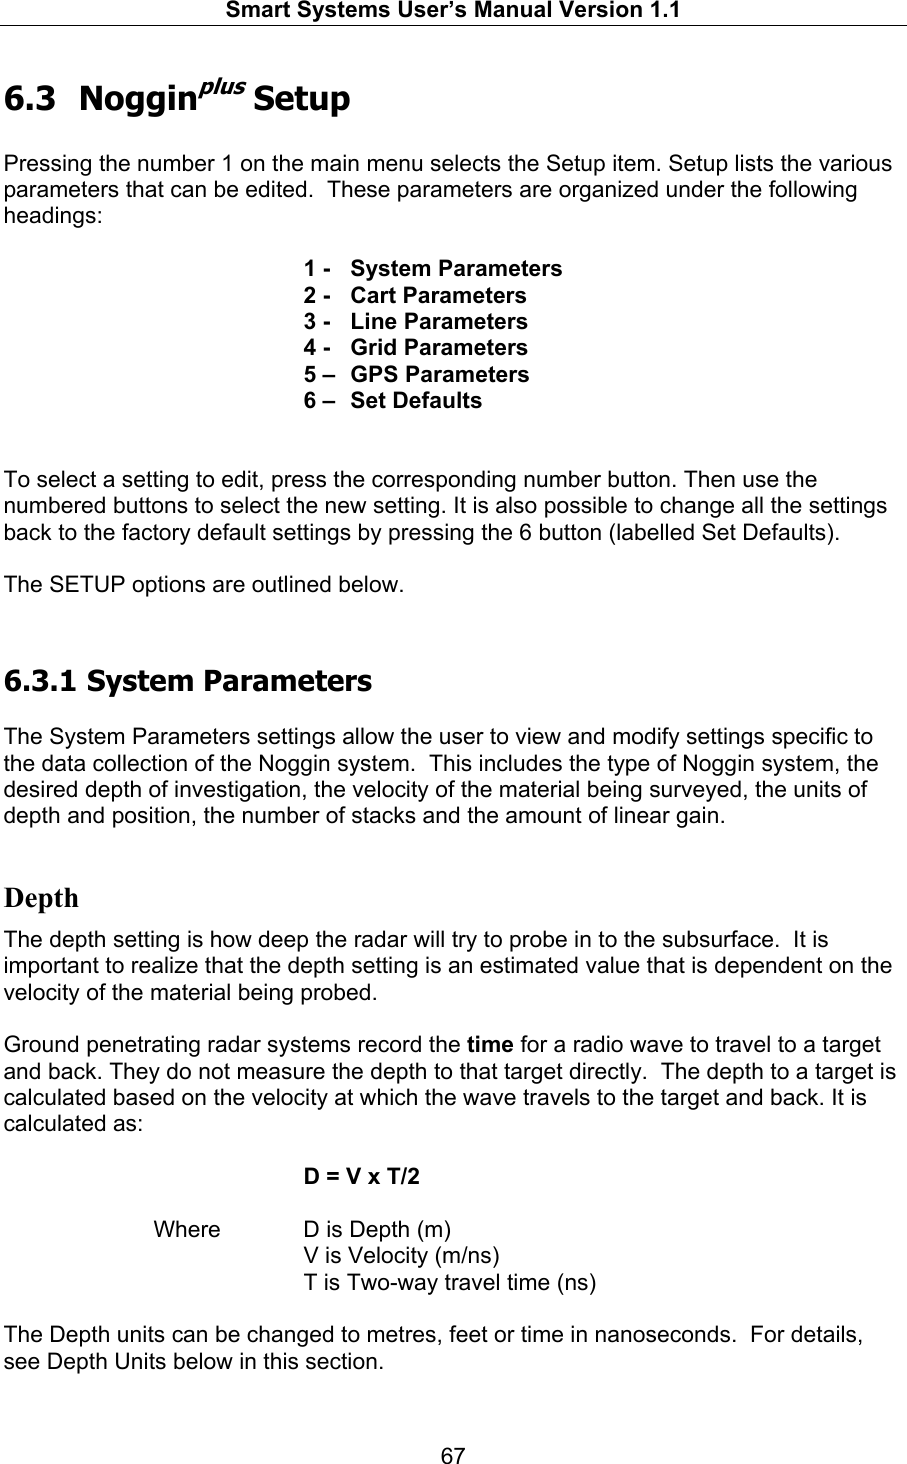   Smart Systems User’s Manual Version 1.1  67  6.3 Nogginplus Setup  Pressing the number 1 on the main menu selects the Setup item. Setup lists the various parameters that can be edited.  These parameters are organized under the following headings:  1 -   System Parameters 2 -   Cart Parameters 3 -   Line Parameters 4 -   Grid Parameters 5 –  GPS Parameters 6 –  Set Defaults   To select a setting to edit, press the corresponding number button. Then use the numbered buttons to select the new setting. It is also possible to change all the settings back to the factory default settings by pressing the 6 button (labelled Set Defaults).  The SETUP options are outlined below.  6.3.1  System Parameters  The System Parameters settings allow the user to view and modify settings specific to the data collection of the Noggin system.  This includes the type of Noggin system, the desired depth of investigation, the velocity of the material being surveyed, the units of depth and position, the number of stacks and the amount of linear gain.  Depth The depth setting is how deep the radar will try to probe in to the subsurface.  It is important to realize that the depth setting is an estimated value that is dependent on the velocity of the material being probed.    Ground penetrating radar systems record the time for a radio wave to travel to a target and back. They do not measure the depth to that target directly.  The depth to a target is calculated based on the velocity at which the wave travels to the target and back. It is calculated as:      D = V x T/2      Where    D is Depth (m)     V is Velocity (m/ns)         T is Two-way travel time (ns)  The Depth units can be changed to metres, feet or time in nanoseconds.  For details, see Depth Units below in this section.    